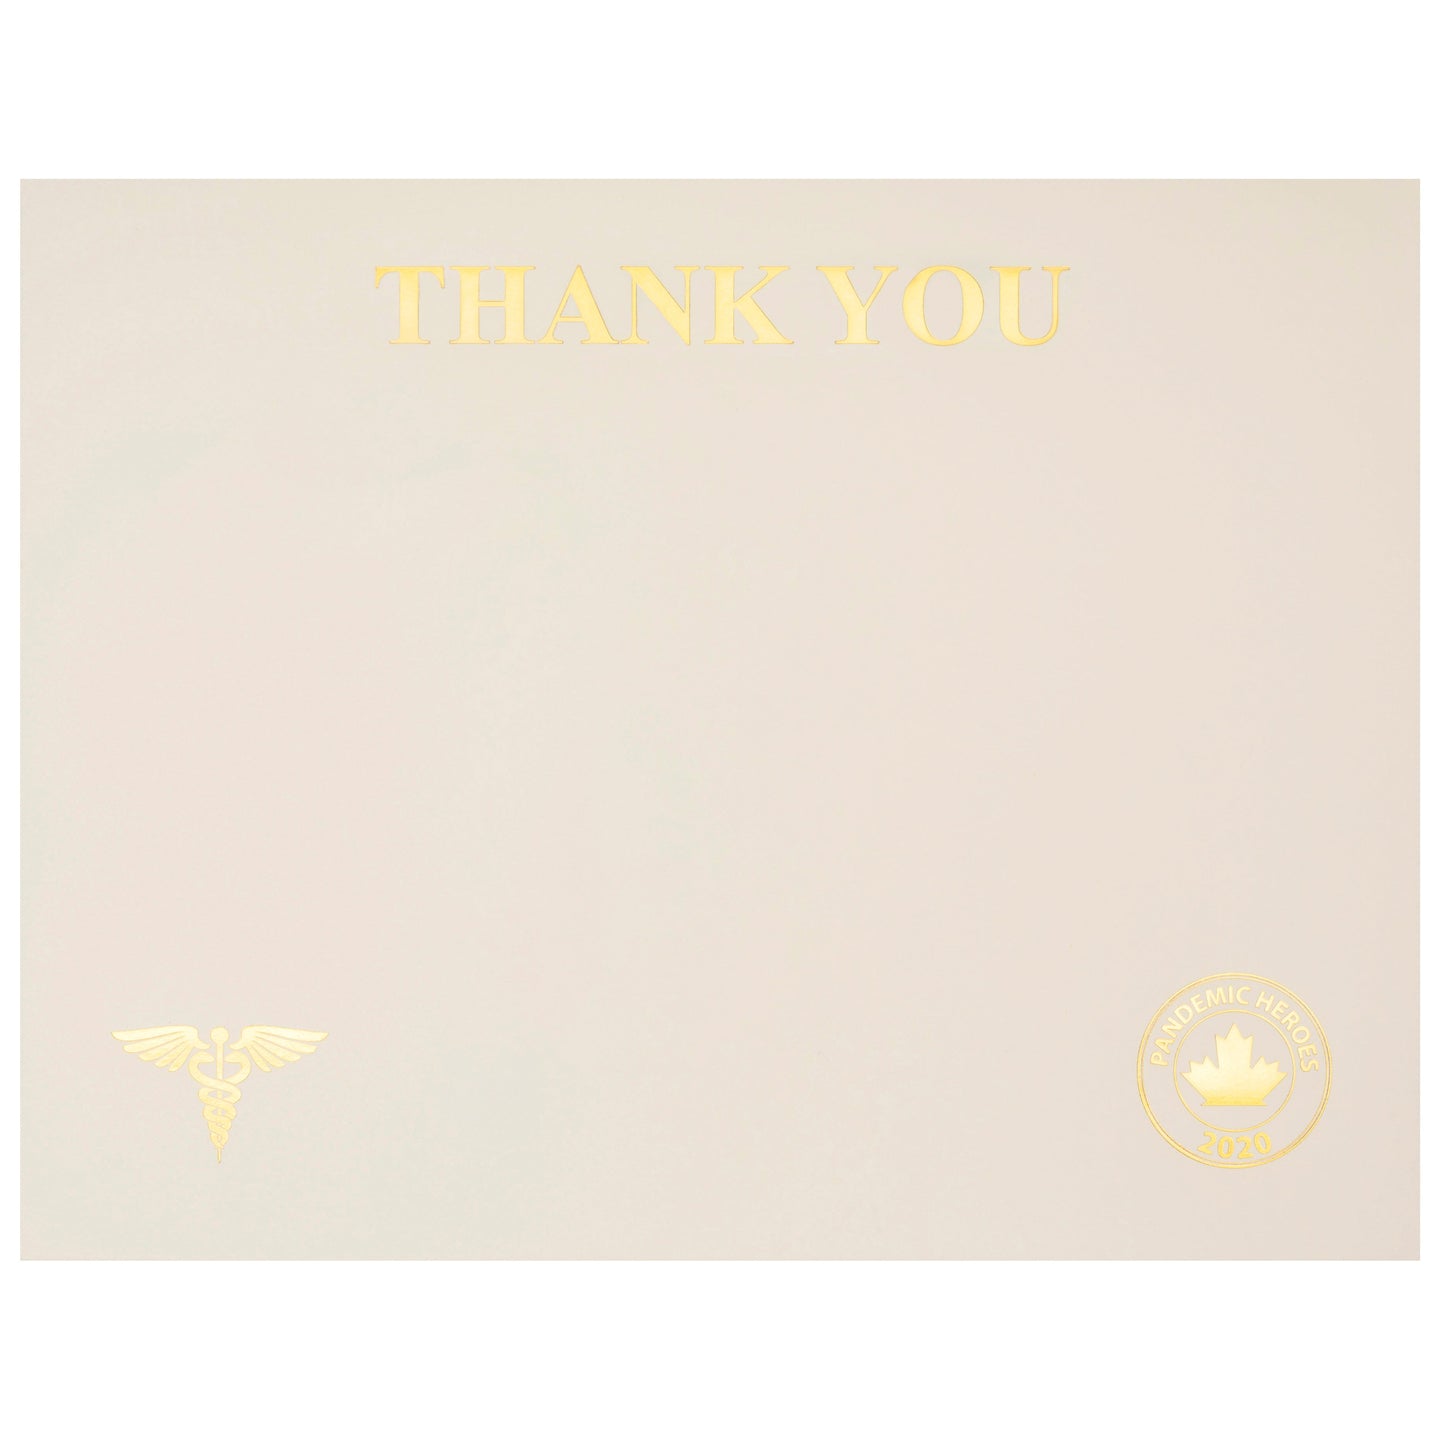 St. James® Premium Weight "Thank You 2020" Certificates, Gold Foil, Ivory, 65 lb, 8.5 x 11", Pack of 25